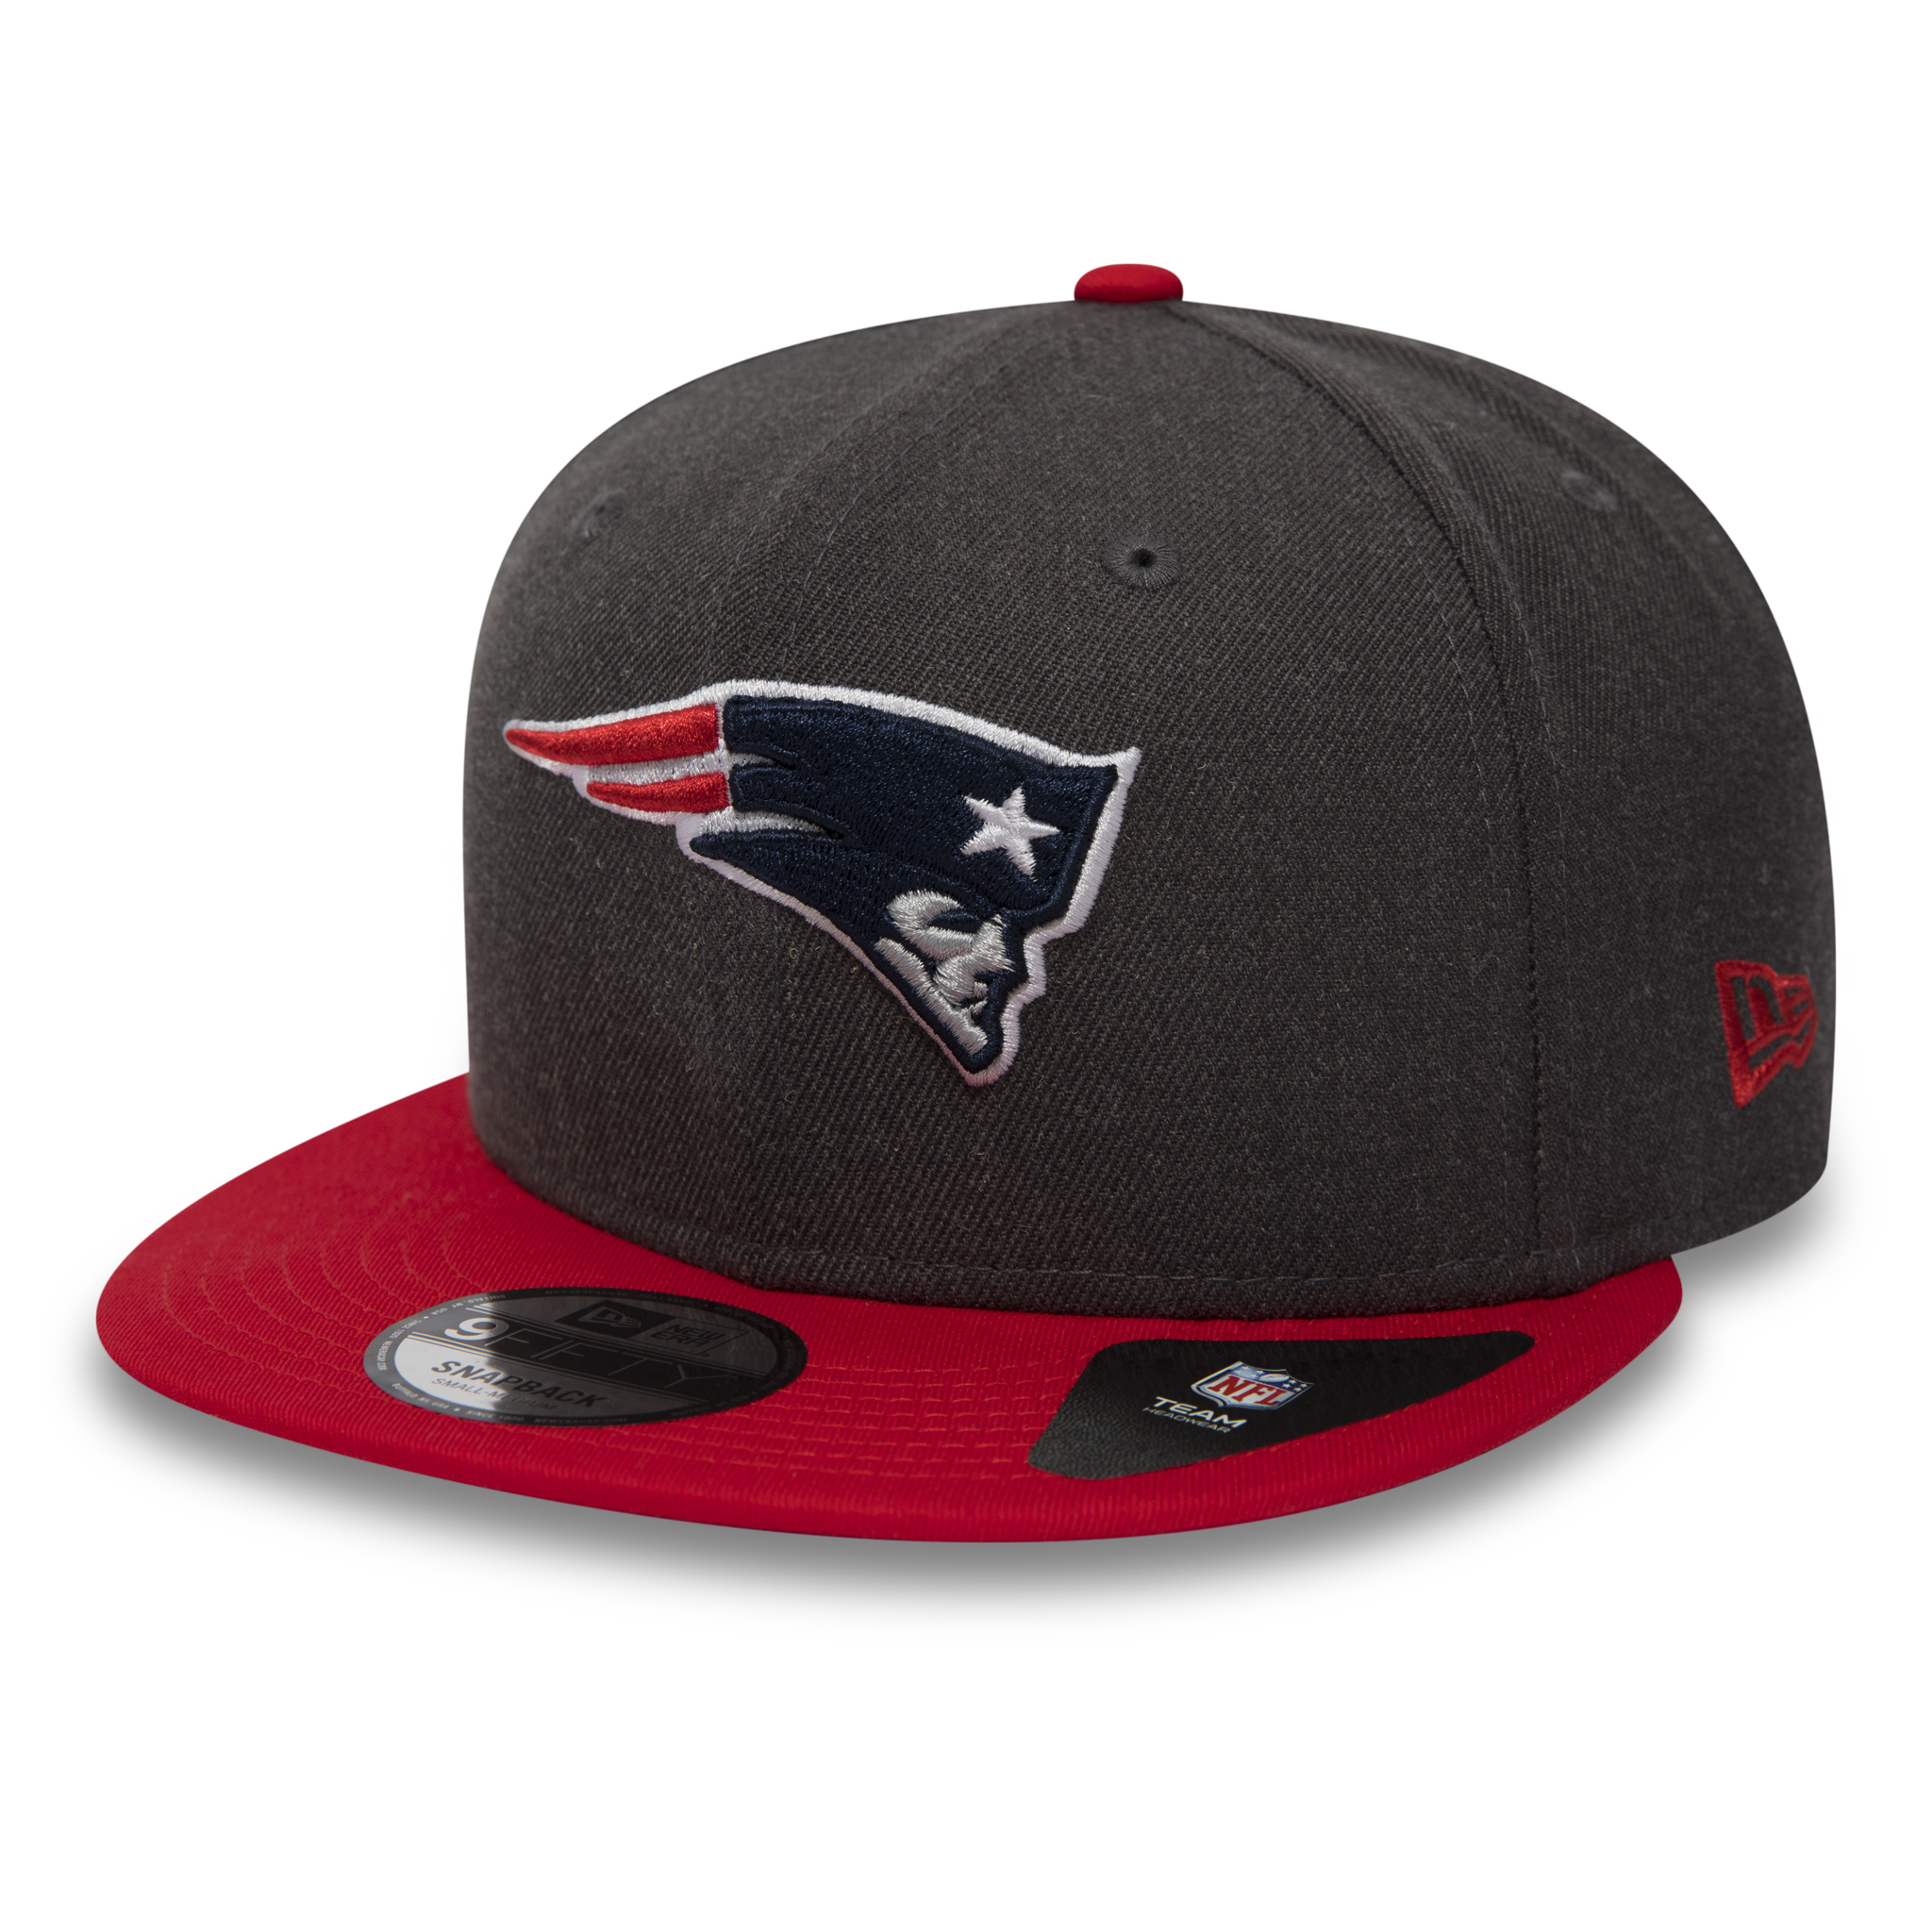 New England Patriots 9FIFTY-Kappe in Grafit